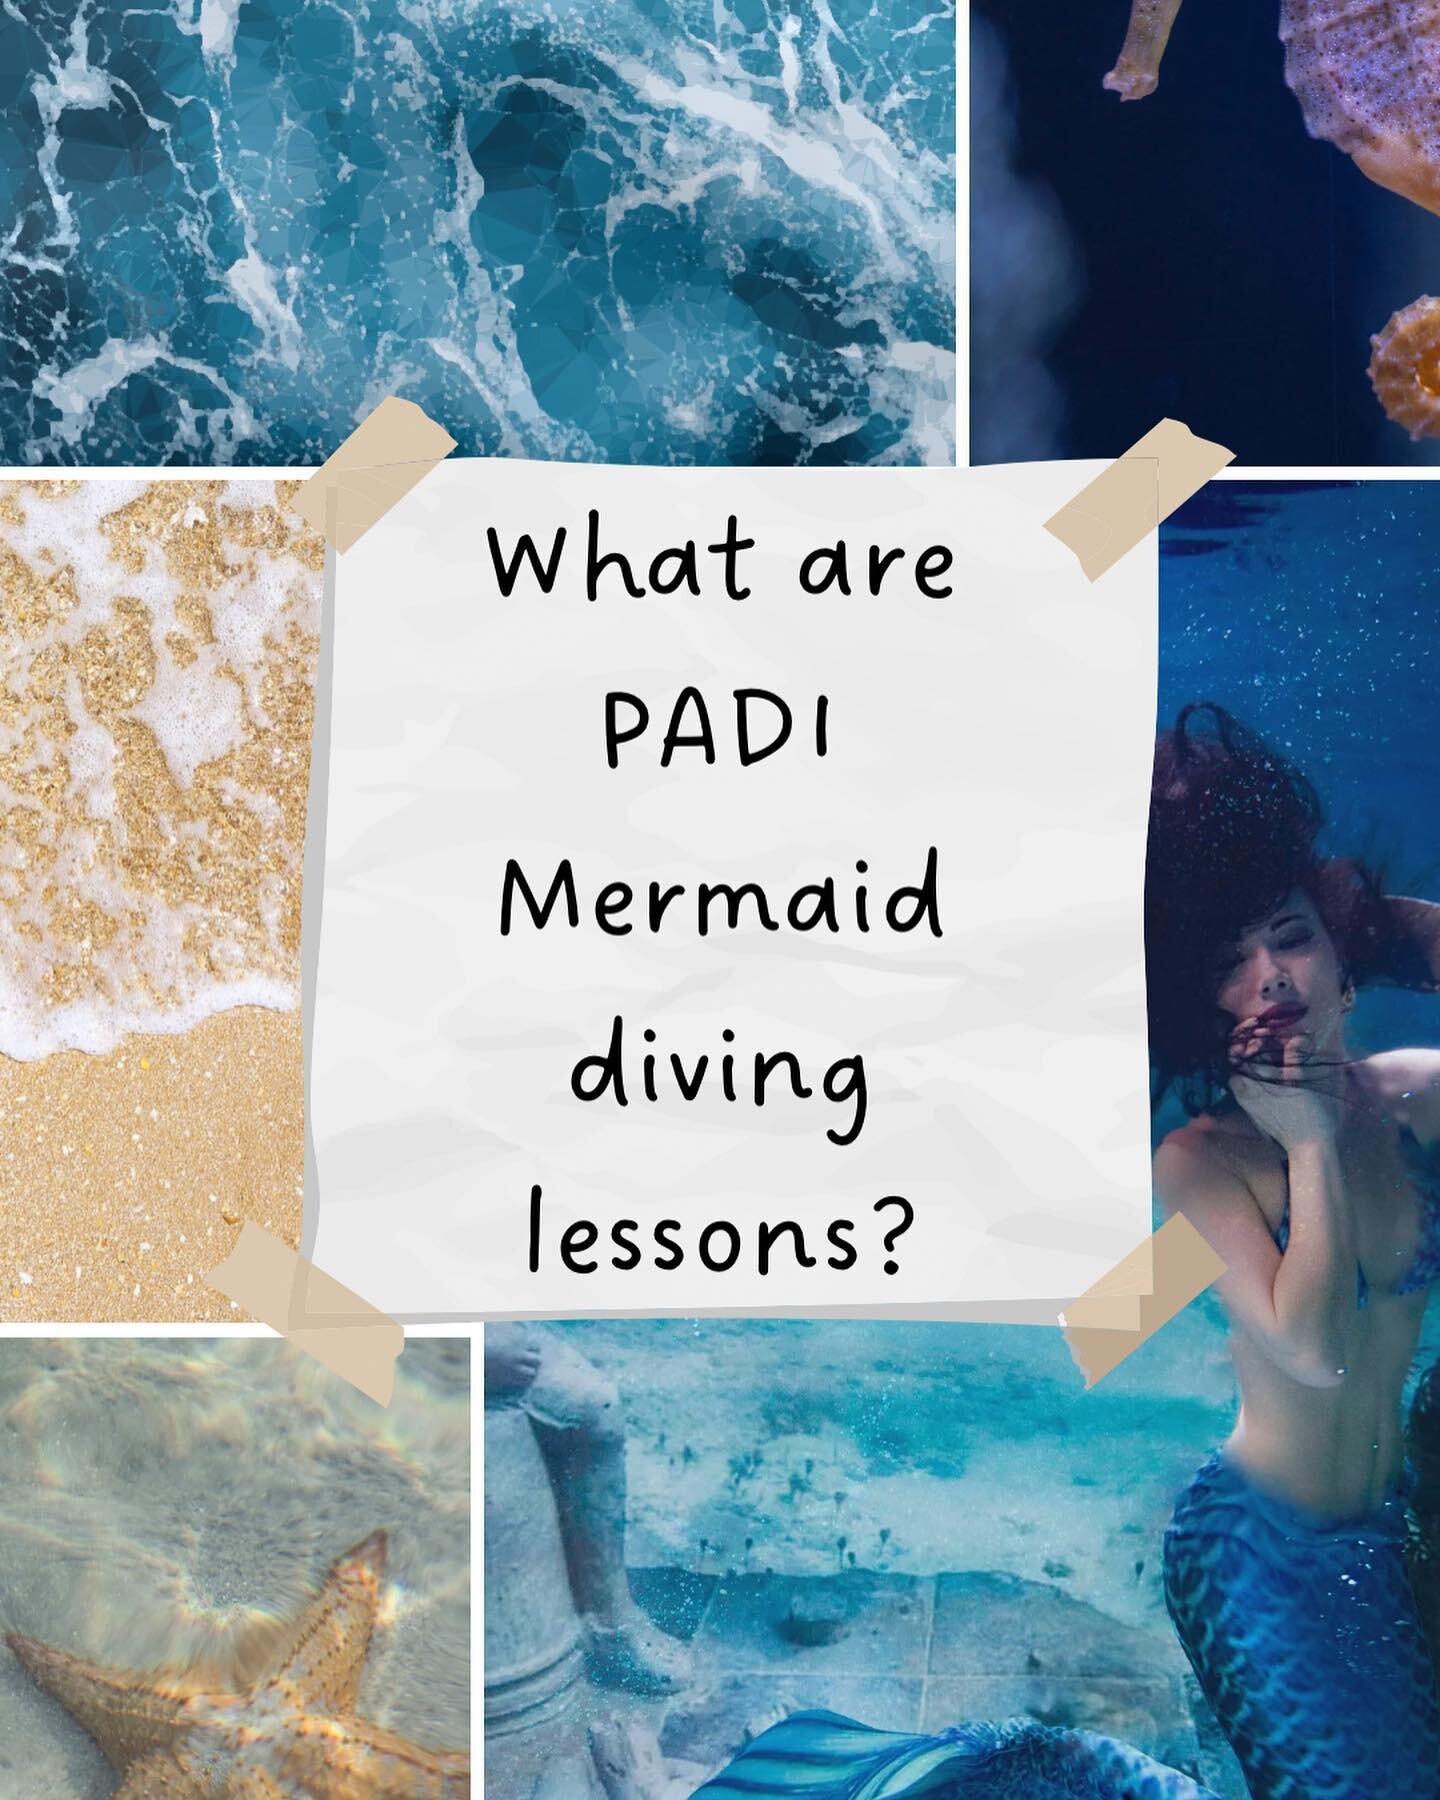 You really can become a mermaid! PADI mermaid lessons highlight the importance of safety in the water, proper swimming techniques (to reduce the risk of injury), and proper conduct around aquatic life like manatees. 
.
.
.
#padimermaid #padidiving #m